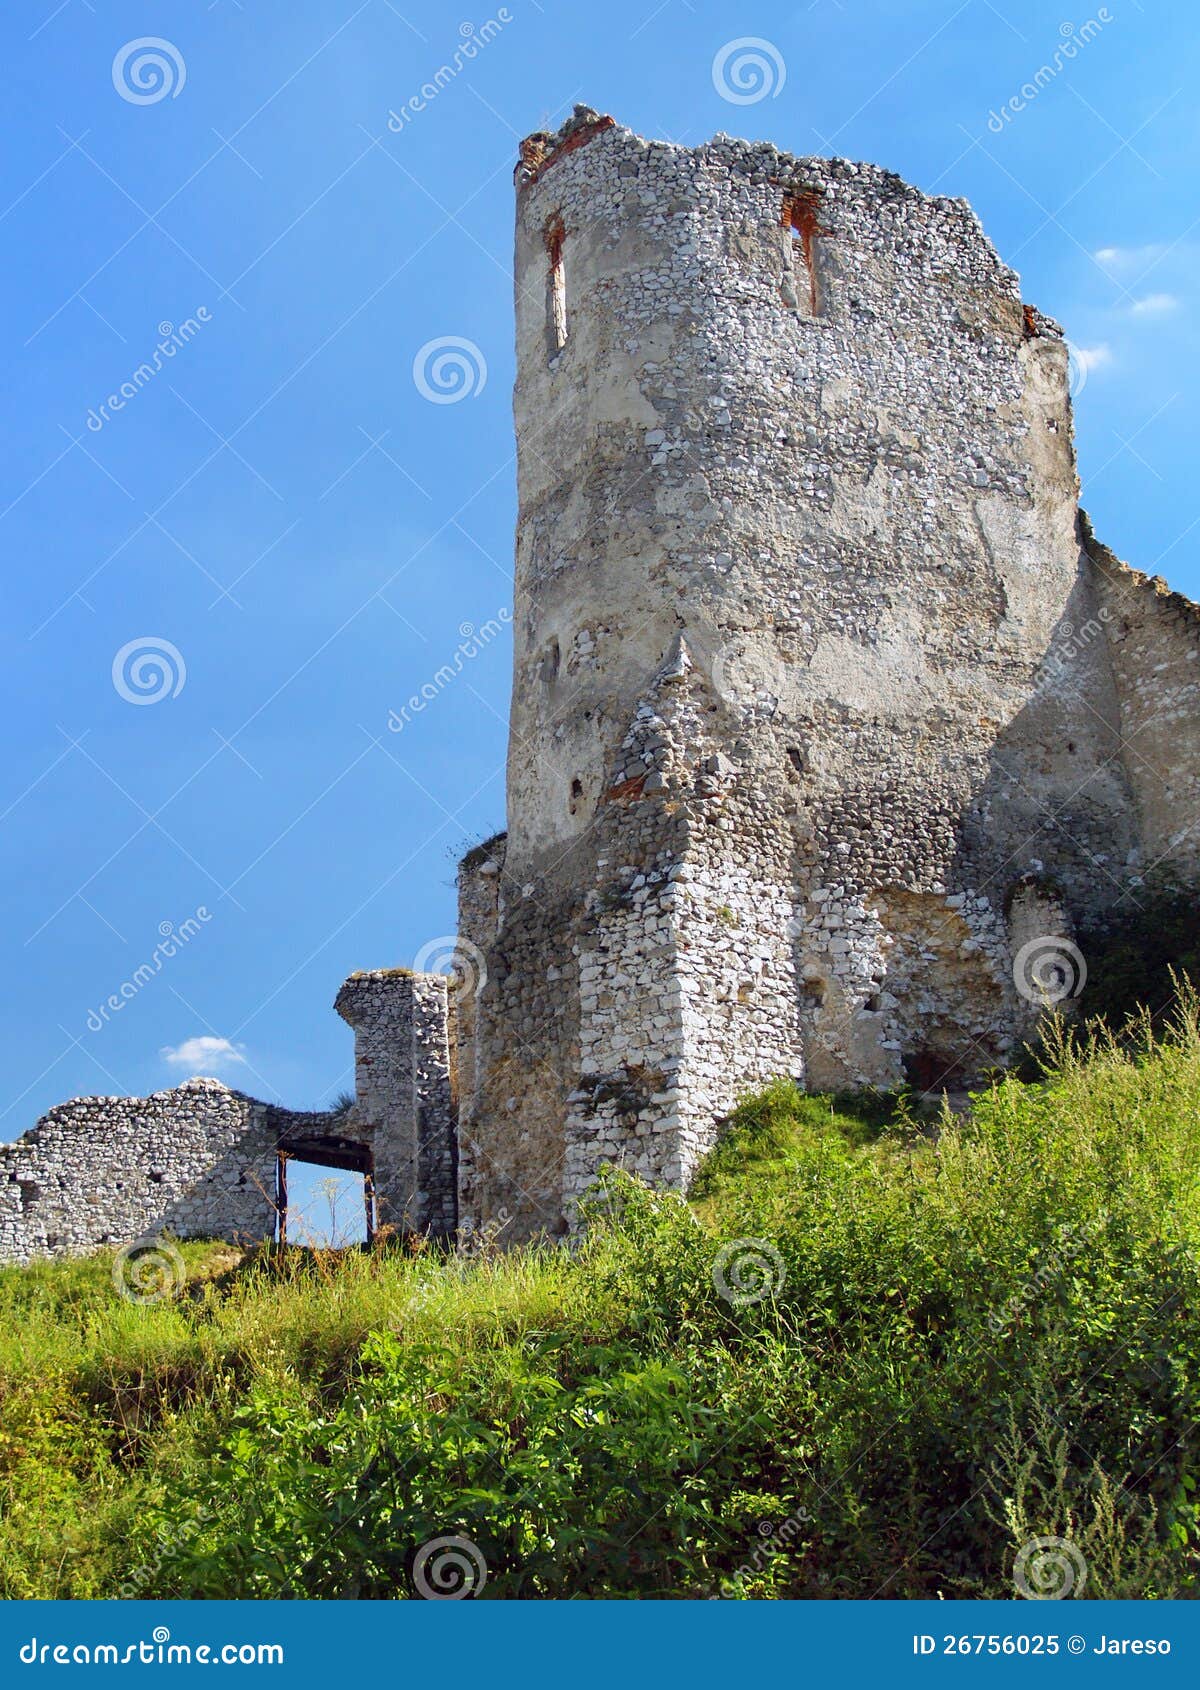 donjon of the castle of cachtice, slovakia